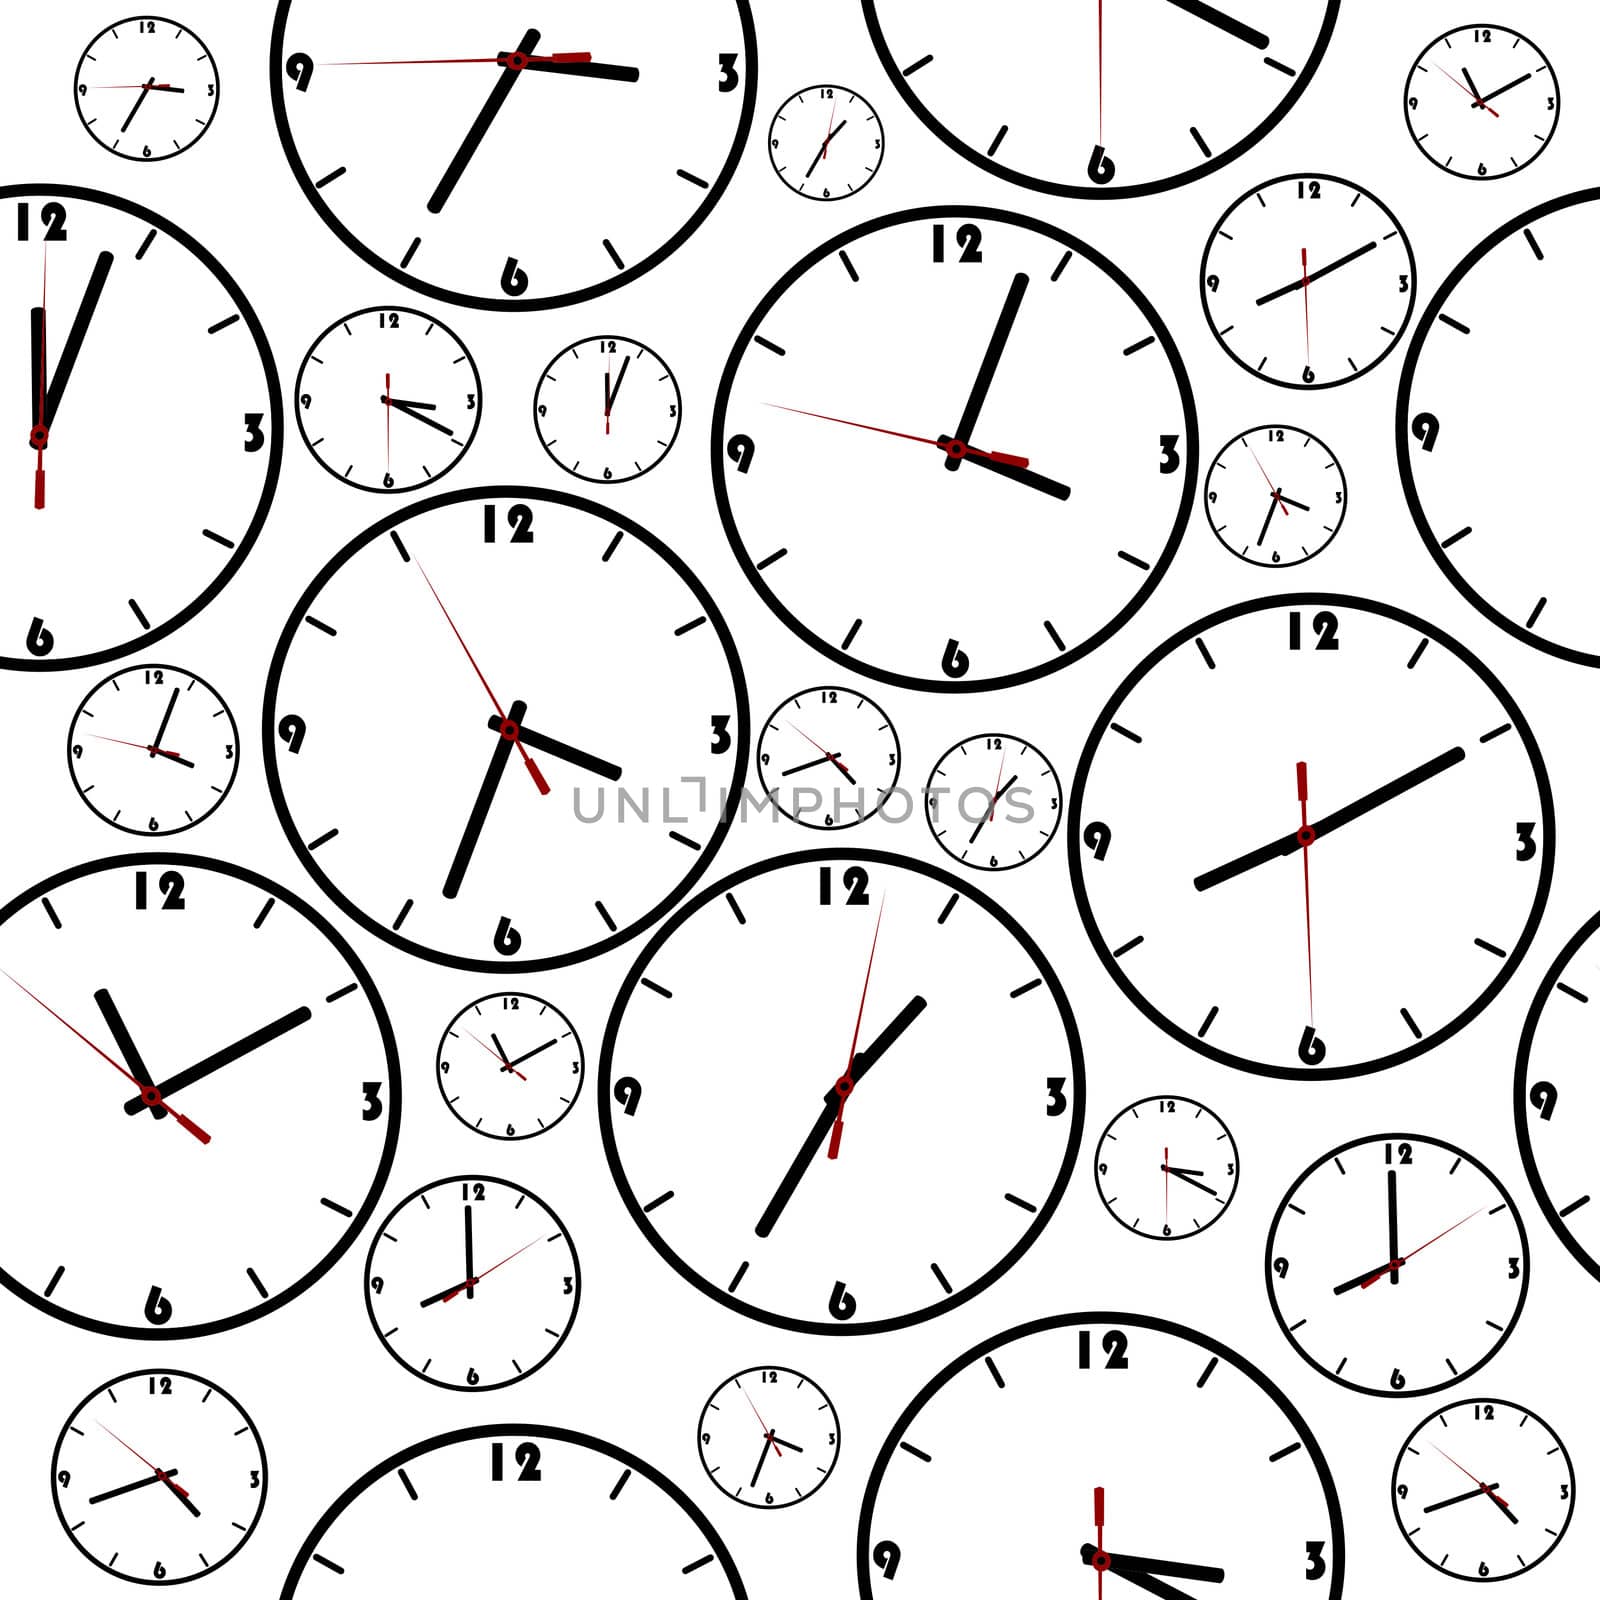 Background with simple clocks by hibrida13